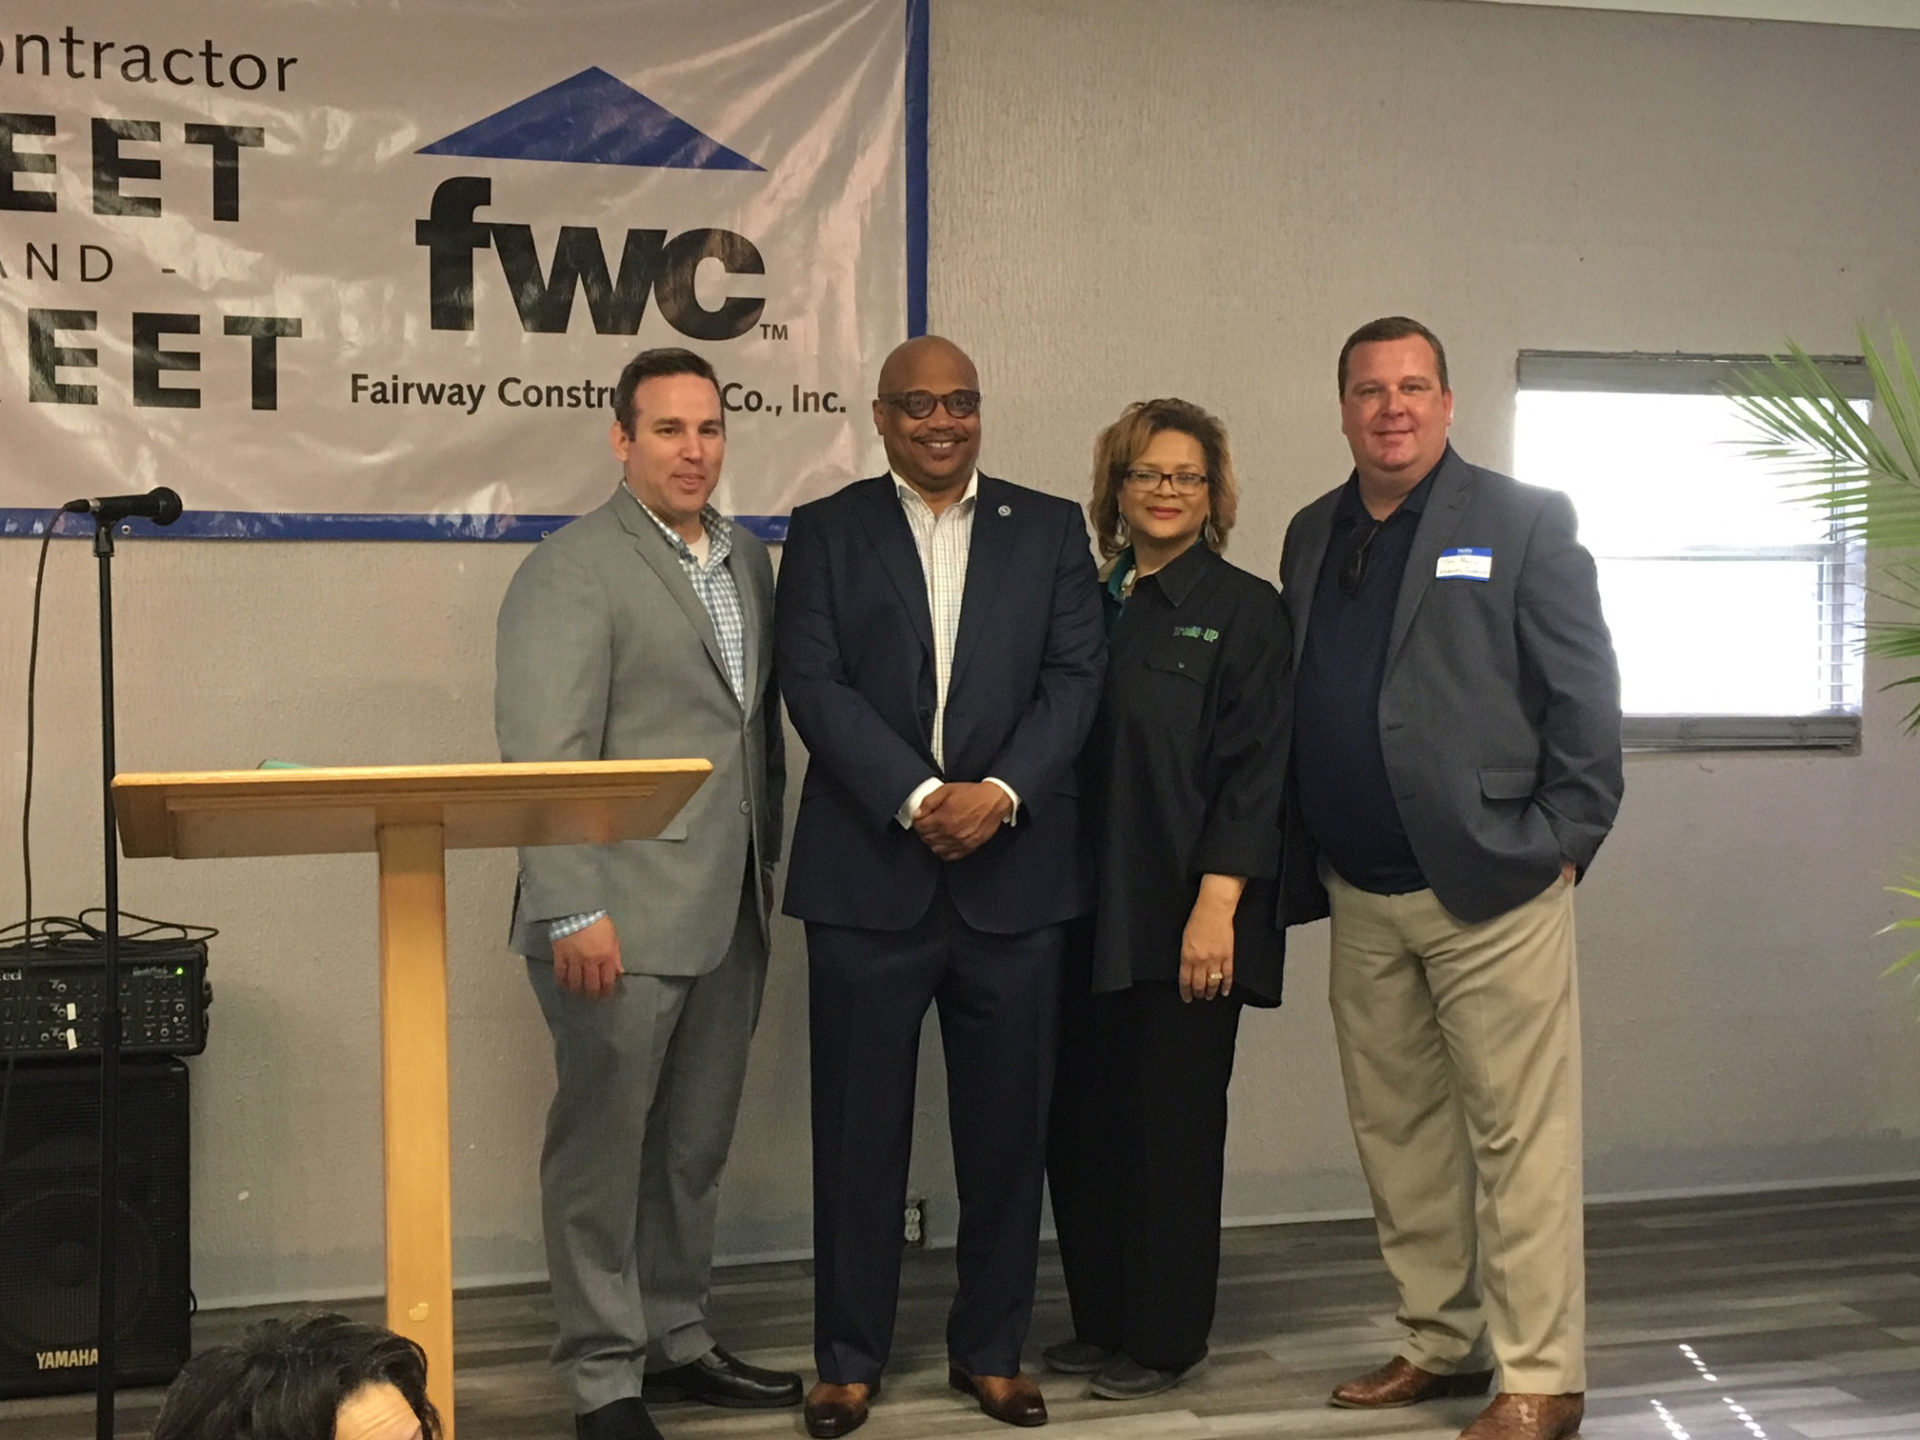 The Higher Ground Church and the Beverly J. Searles Foundation have partnered together to create an affordable independent senior living community in Vine City, Georgia, and Fairway Construction is the construction company for the project.